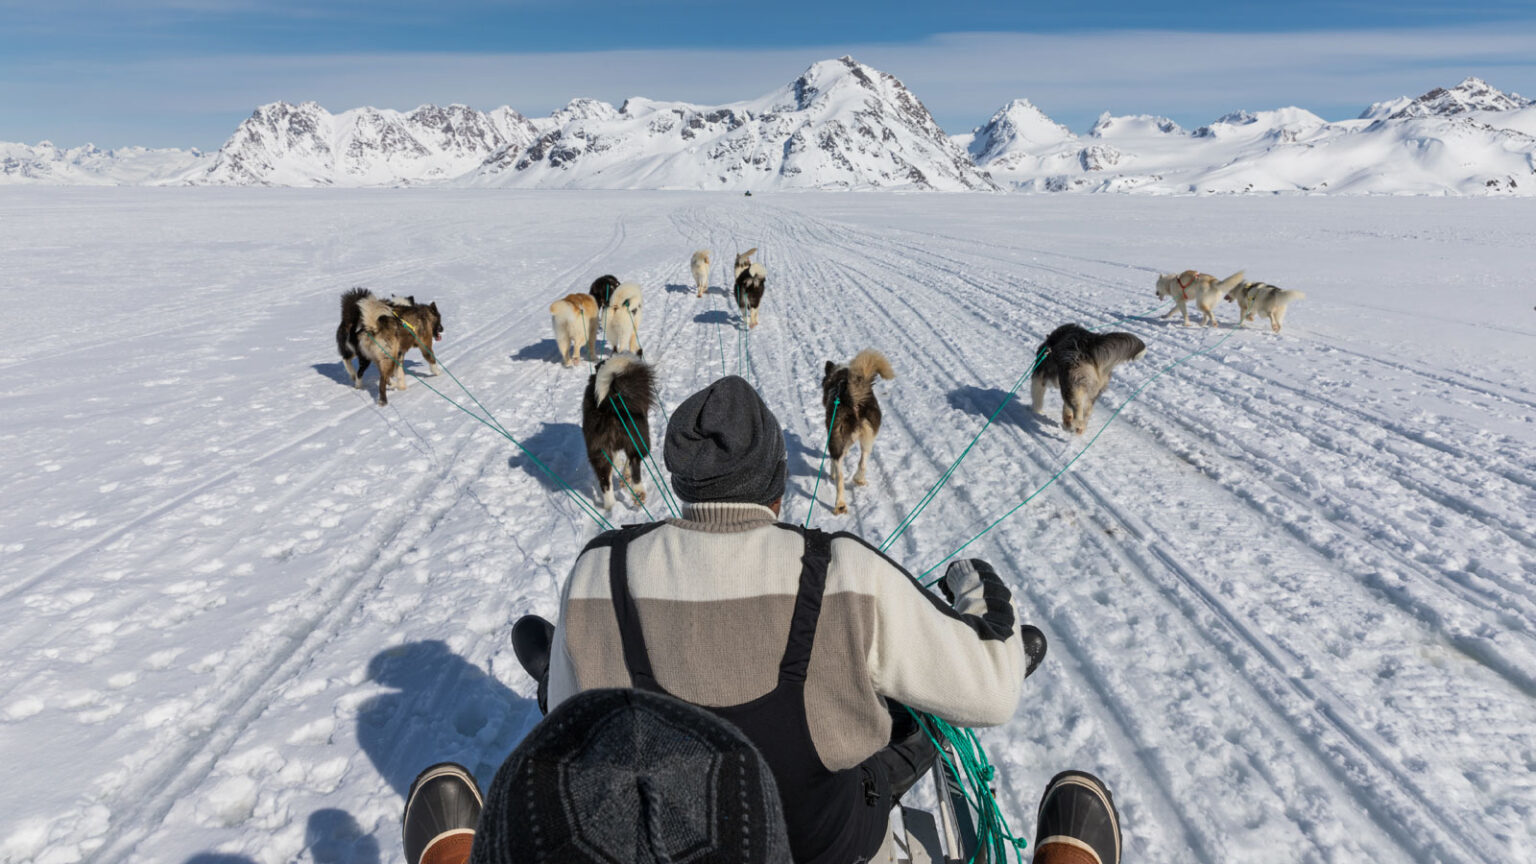 Mobile app helps Inuit hunters monitor ice conditions